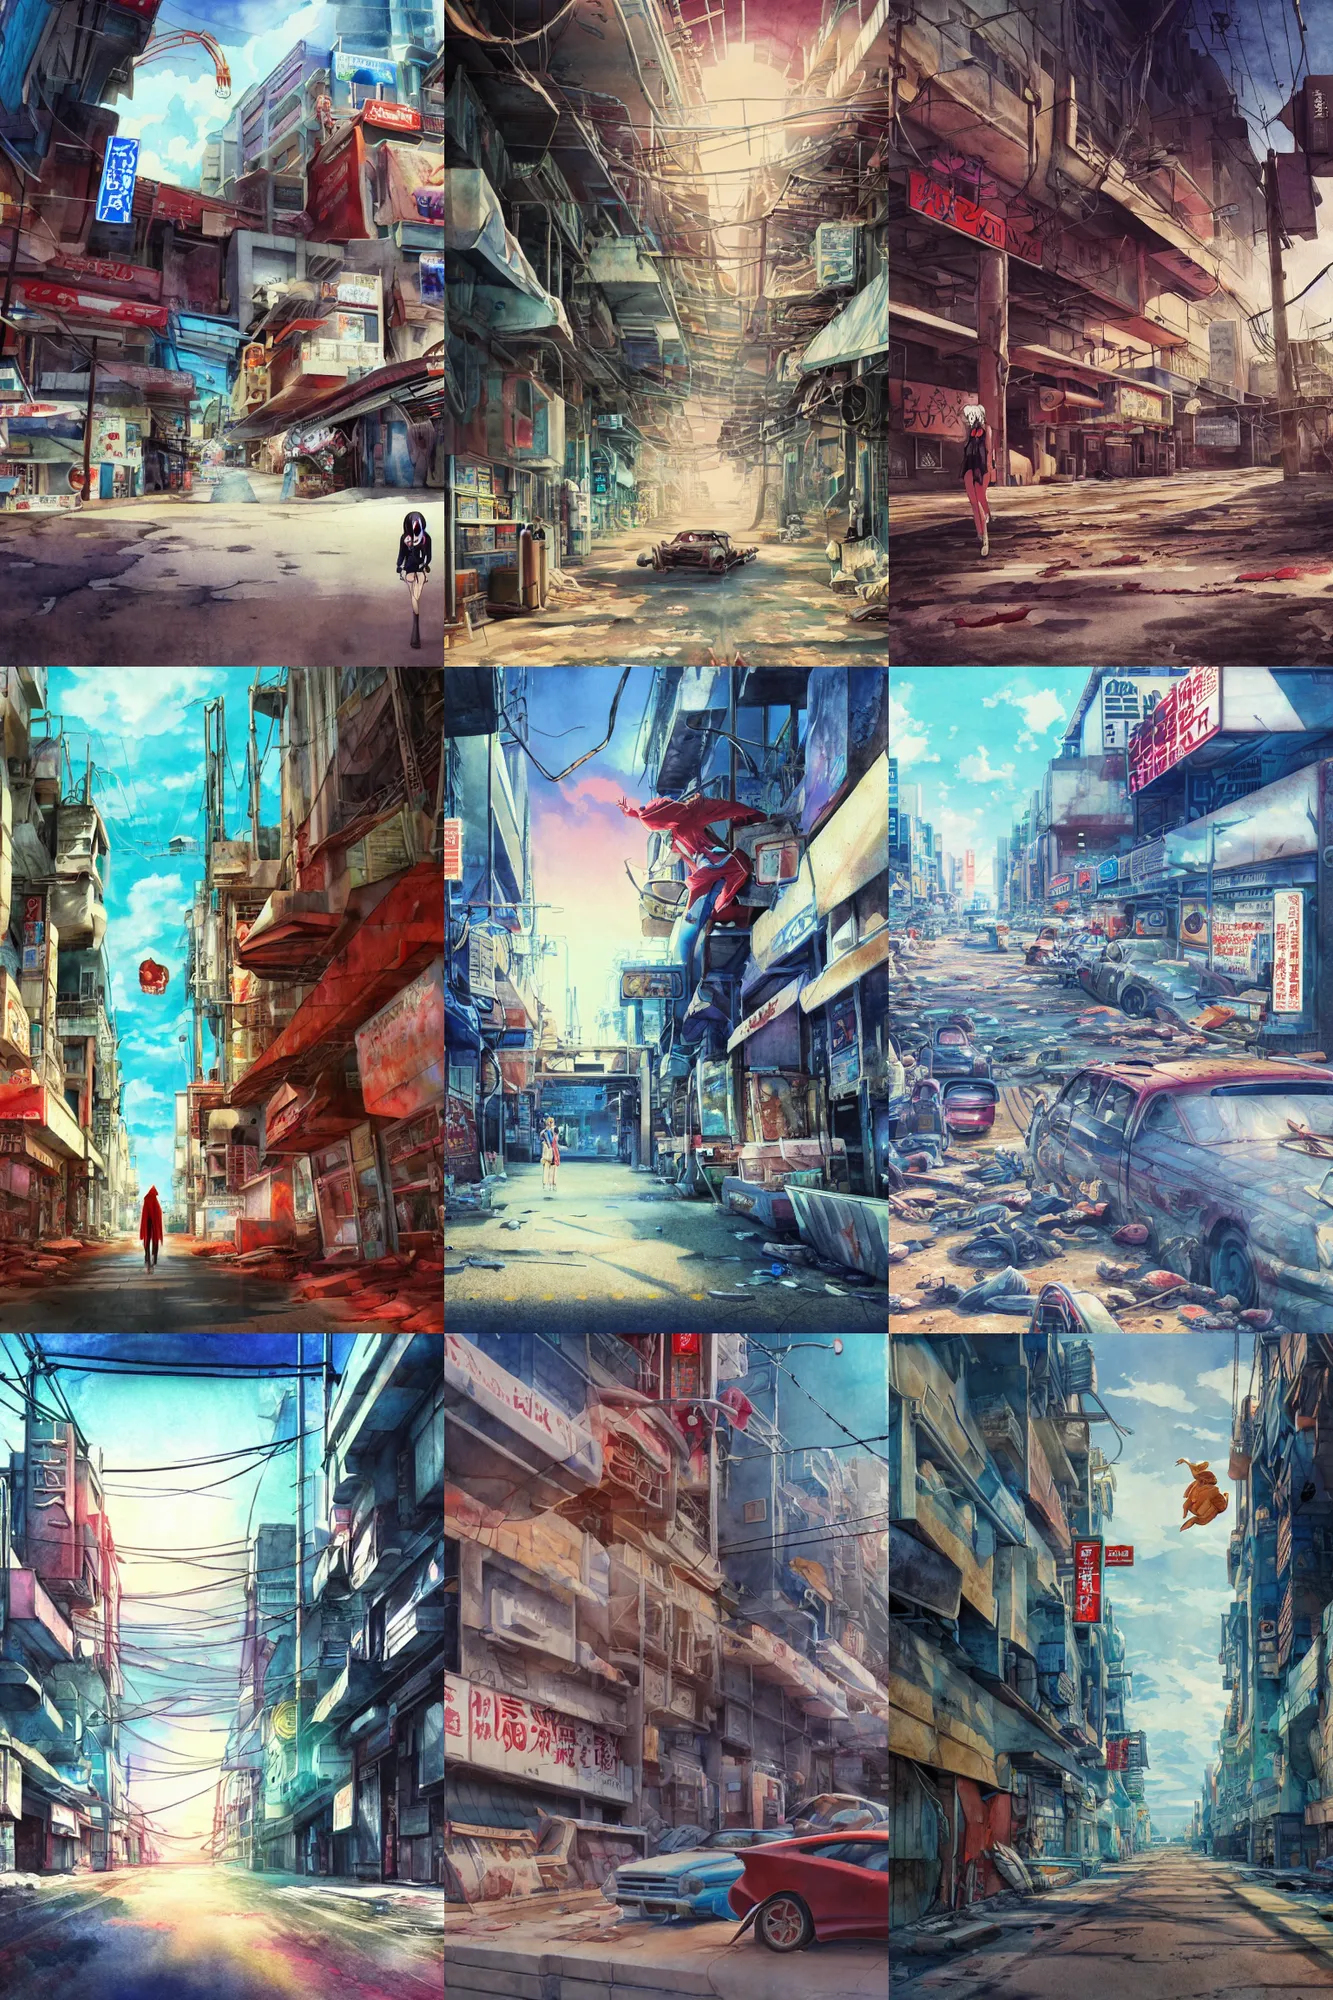 Prompt: incredible anime movie scene, vanishing point, red hoody woman explorer, watercolor, underwater market, empty road, coral reef, billboards, harsh bloom lighting, rim light, abandoned city, paper texture, movie scene, caustics shadows, deserted shinjuku junk town, old pawn shop, bright sun ground, wires, telephone pole, pipes